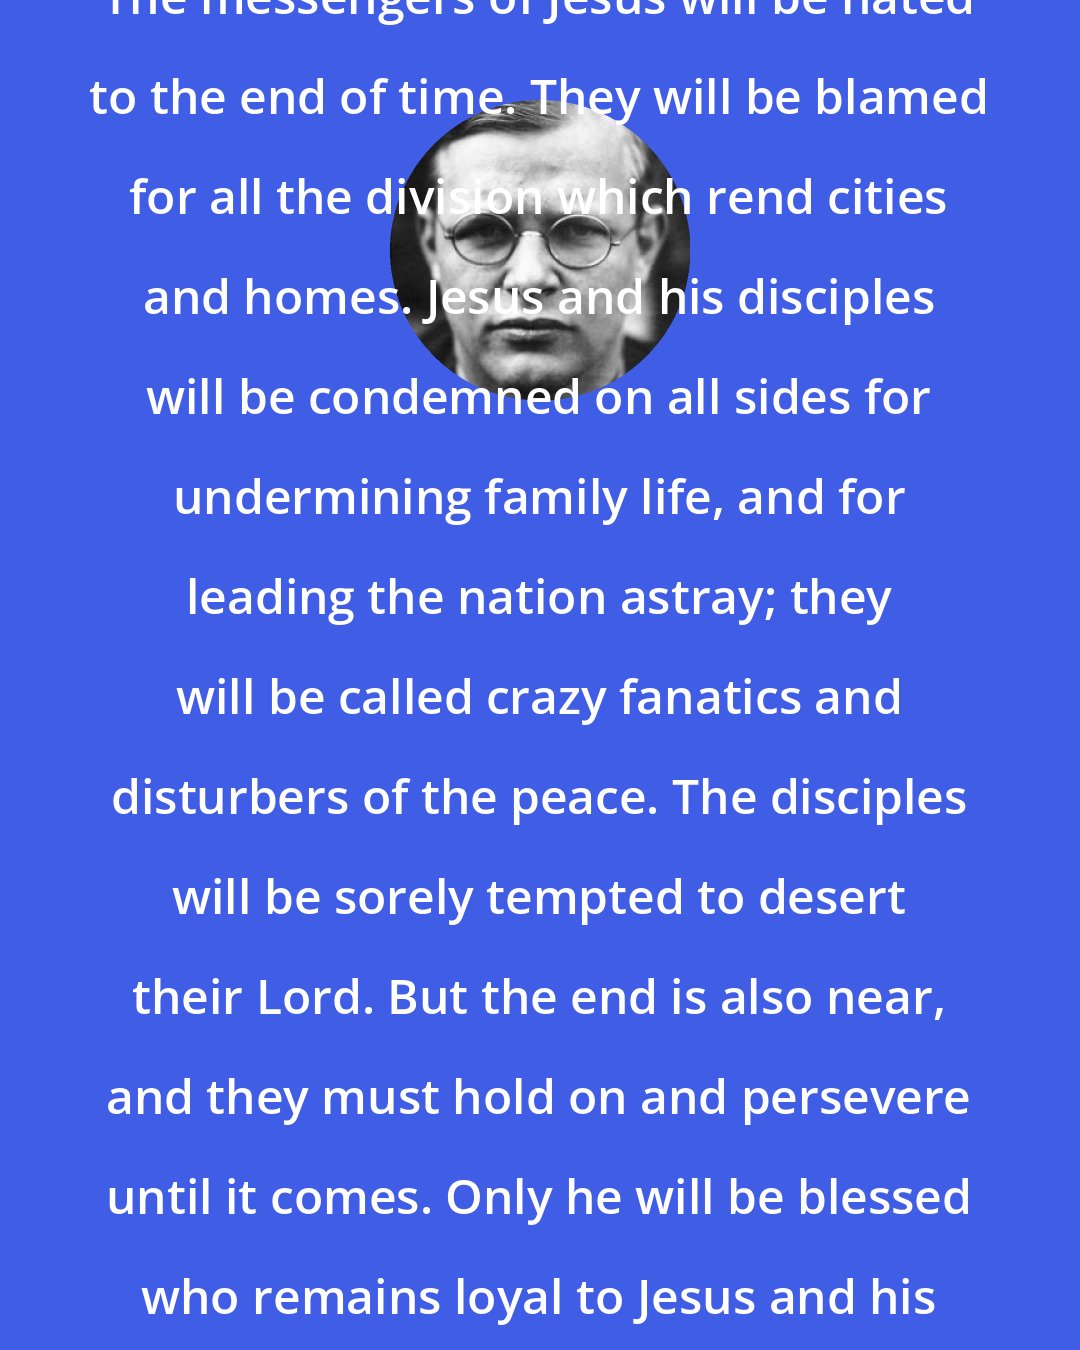 Dietrich Bonhoeffer: The messengers of Jesus will be hated to the end of time. They will be blamed for all the division which rend cities and homes. Jesus and his disciples will be condemned on all sides for undermining family life, and for leading the nation astray; they will be called crazy fanatics and disturbers of the peace. The disciples will be sorely tempted to desert their Lord. But the end is also near, and they must hold on and persevere until it comes. Only he will be blessed who remains loyal to Jesus and his word until the end.